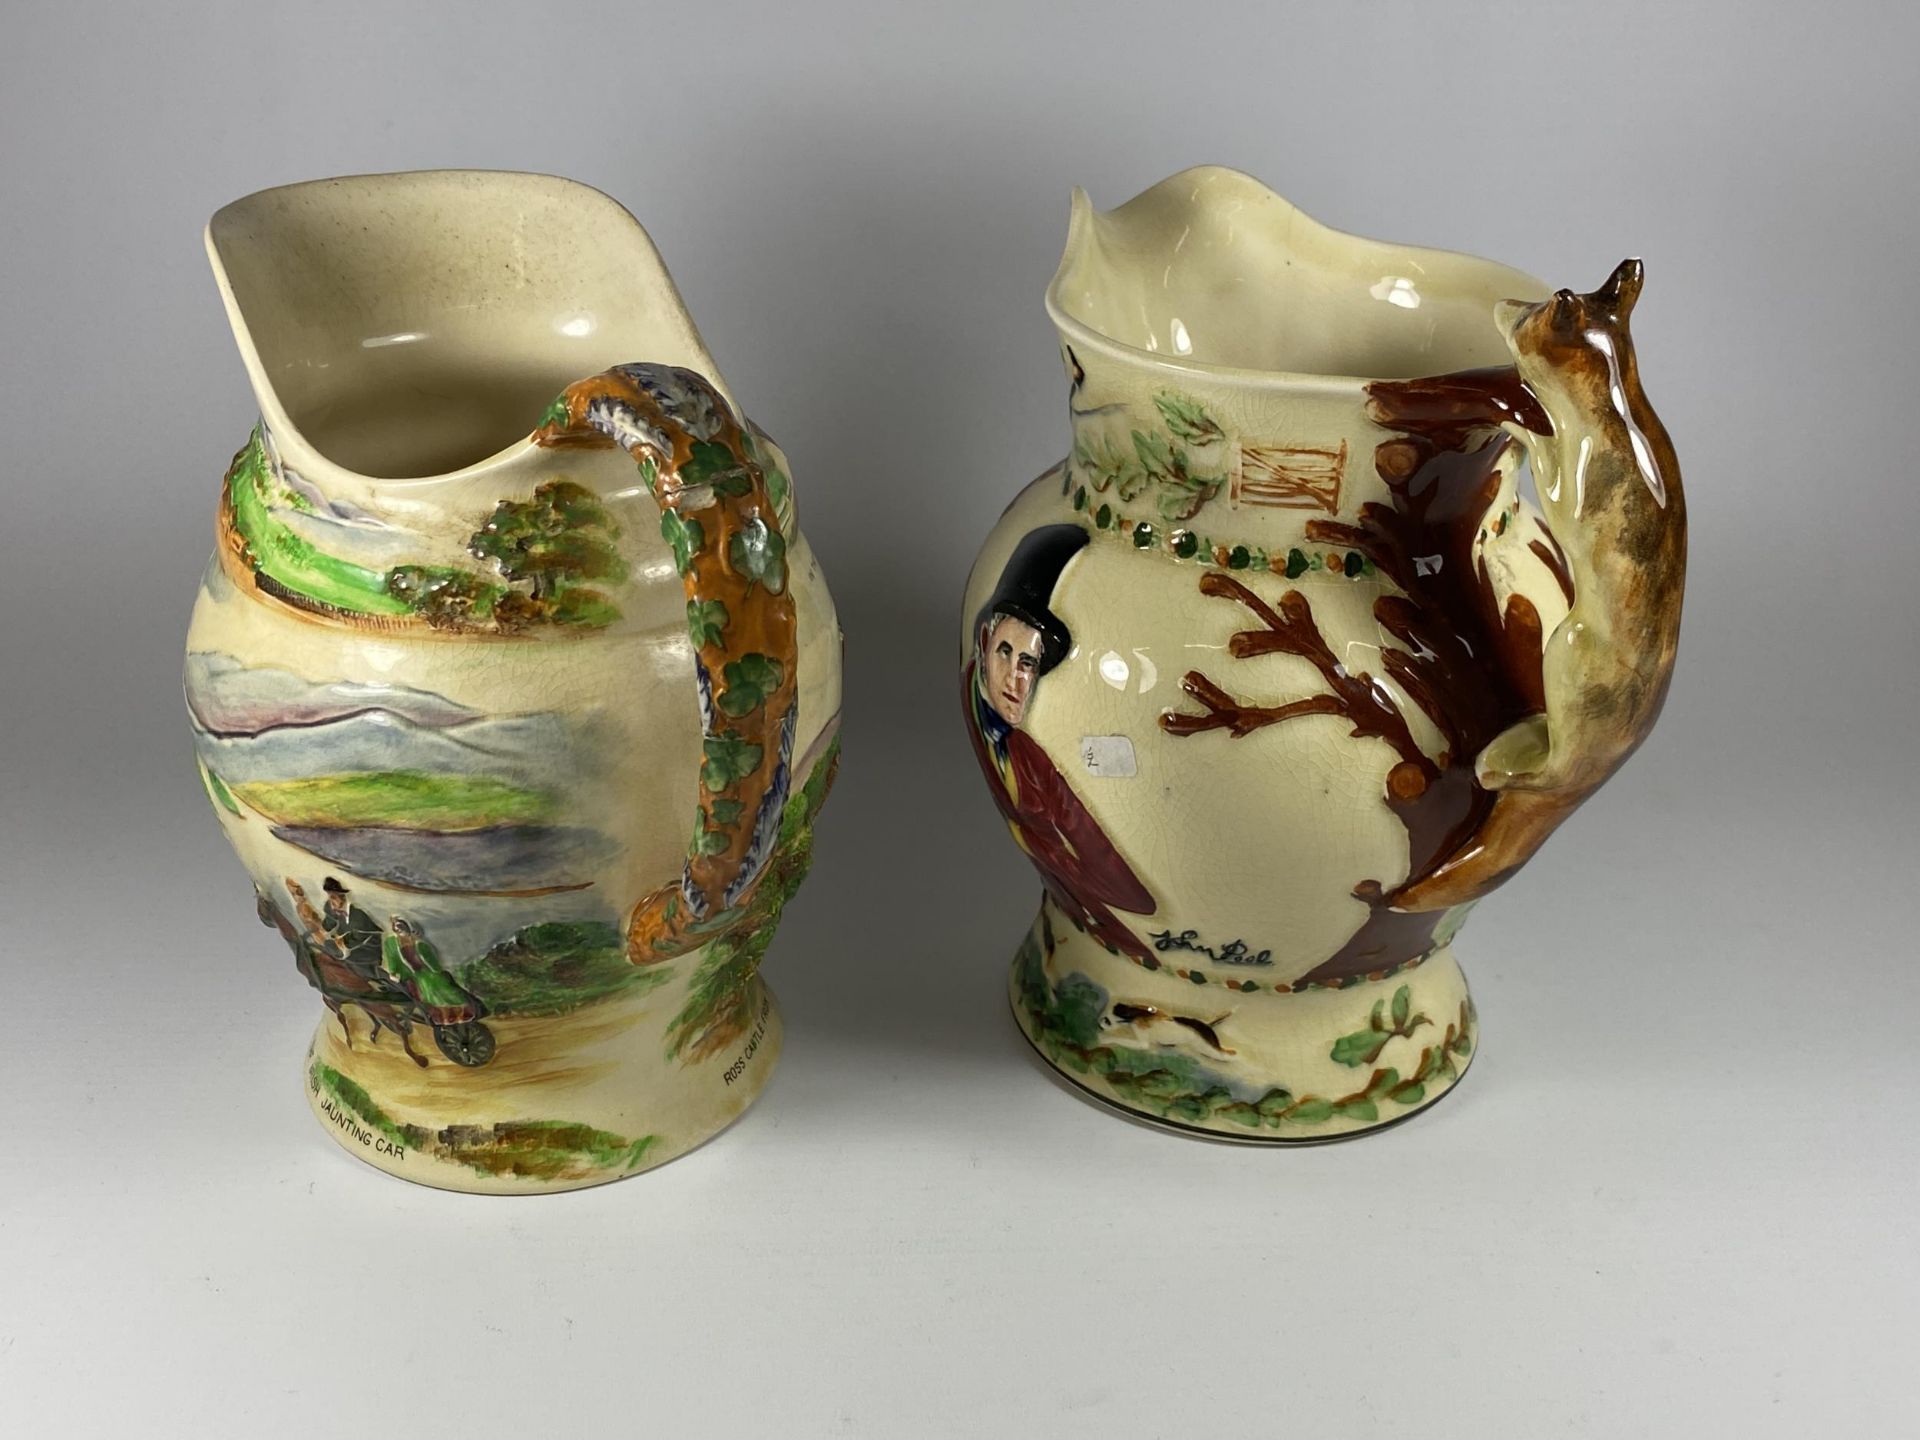 TWO VINTAGE CROWN DEVON FIELDINGS JUGS TO INCLUDE A MUSICAL EXAMPLE - Image 2 of 4